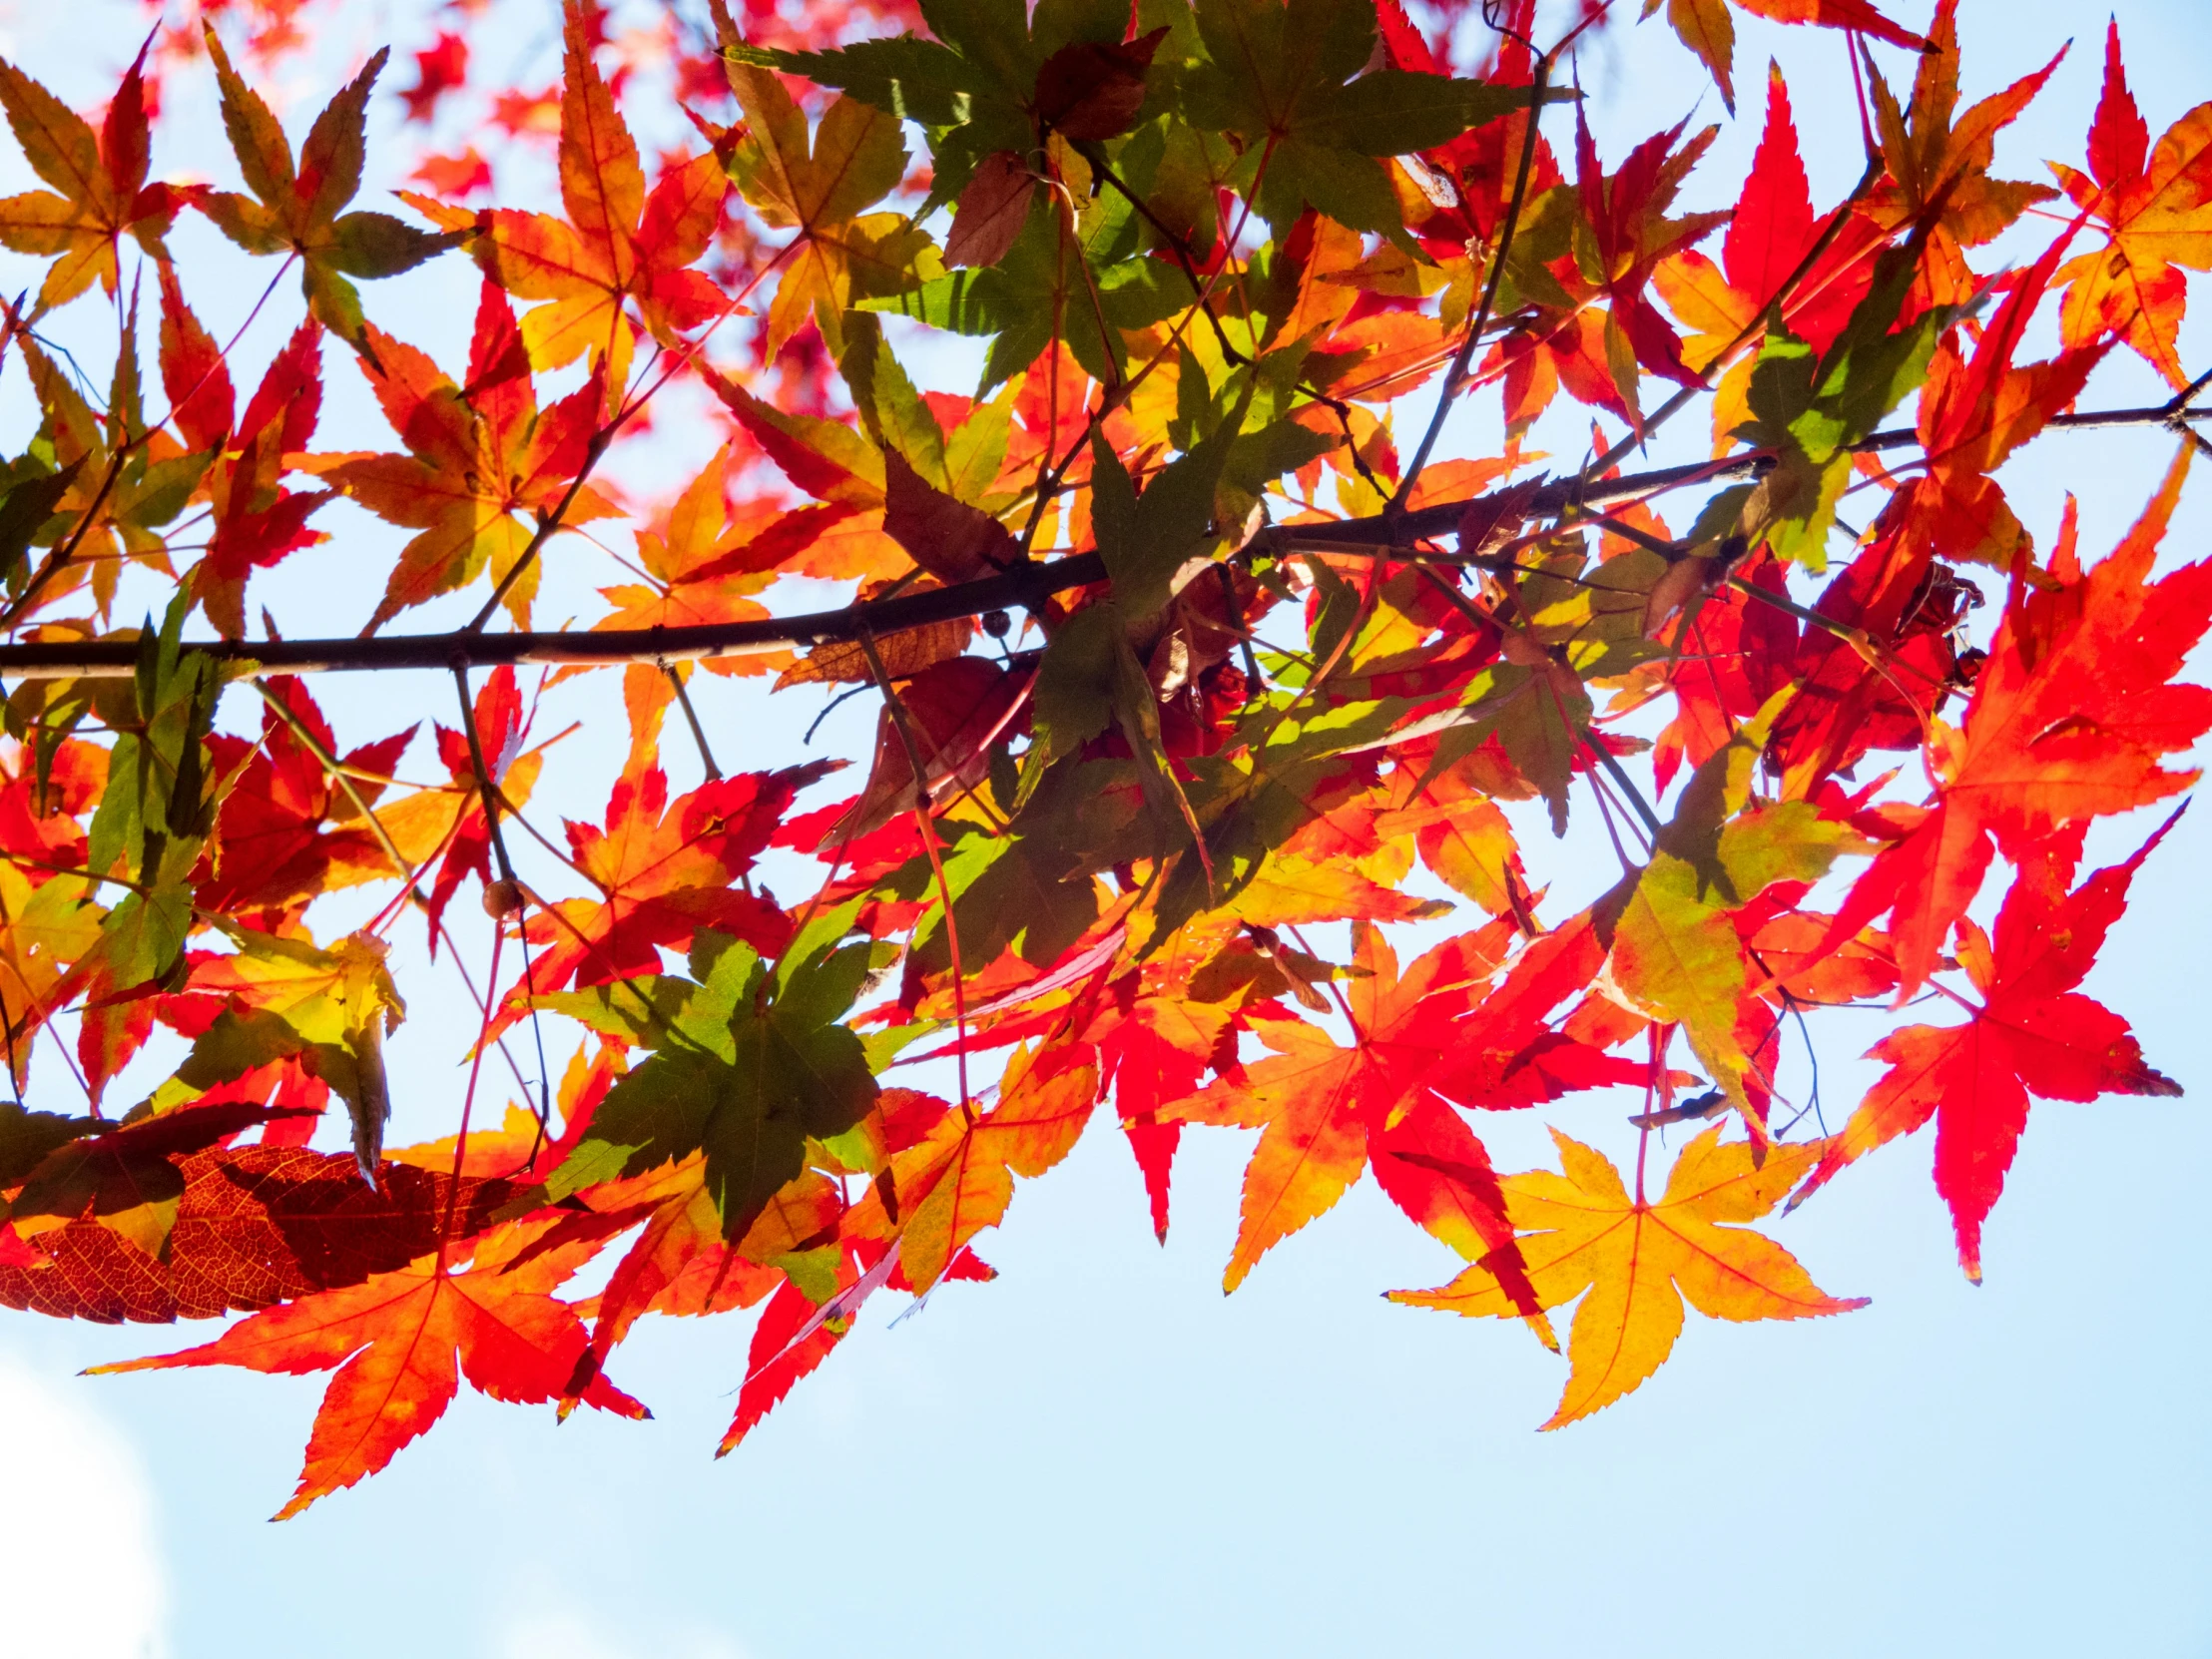 the leaves of a tree in autumn against a clear blue sky